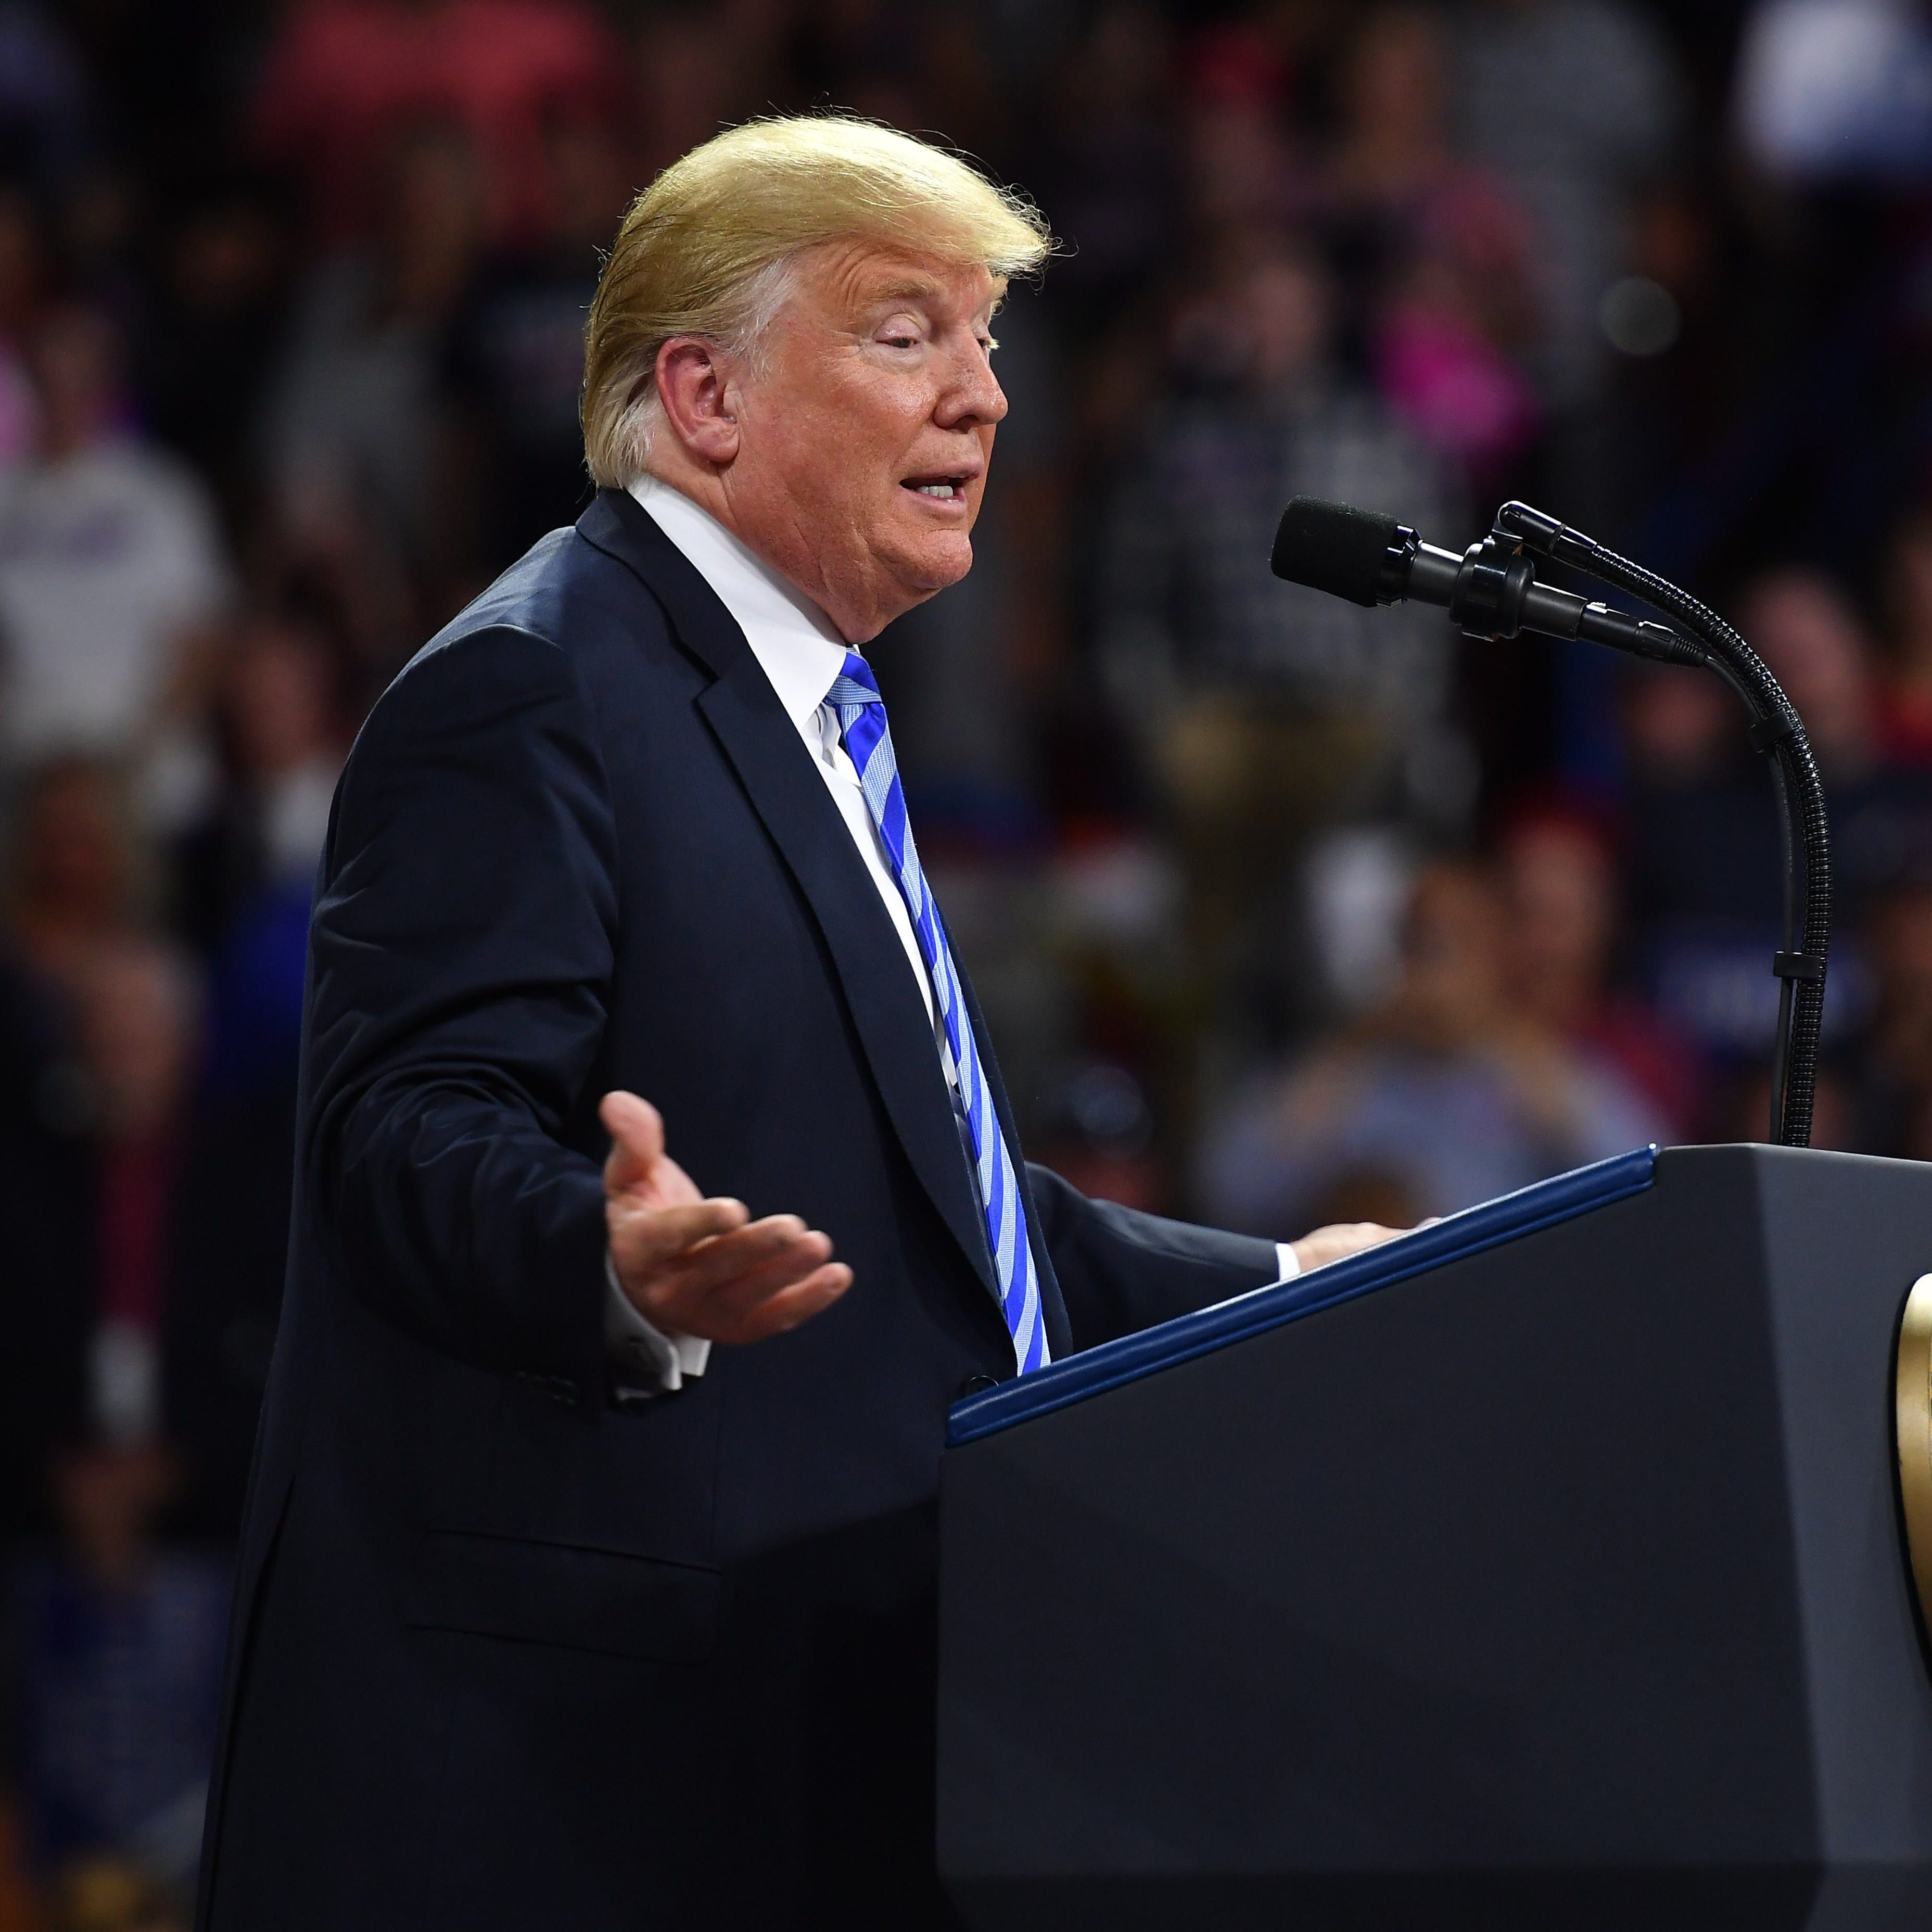 President Trump speaks during a political rally at Charleston Civic Center in Charleston, West Virginia on August 21, 2018.